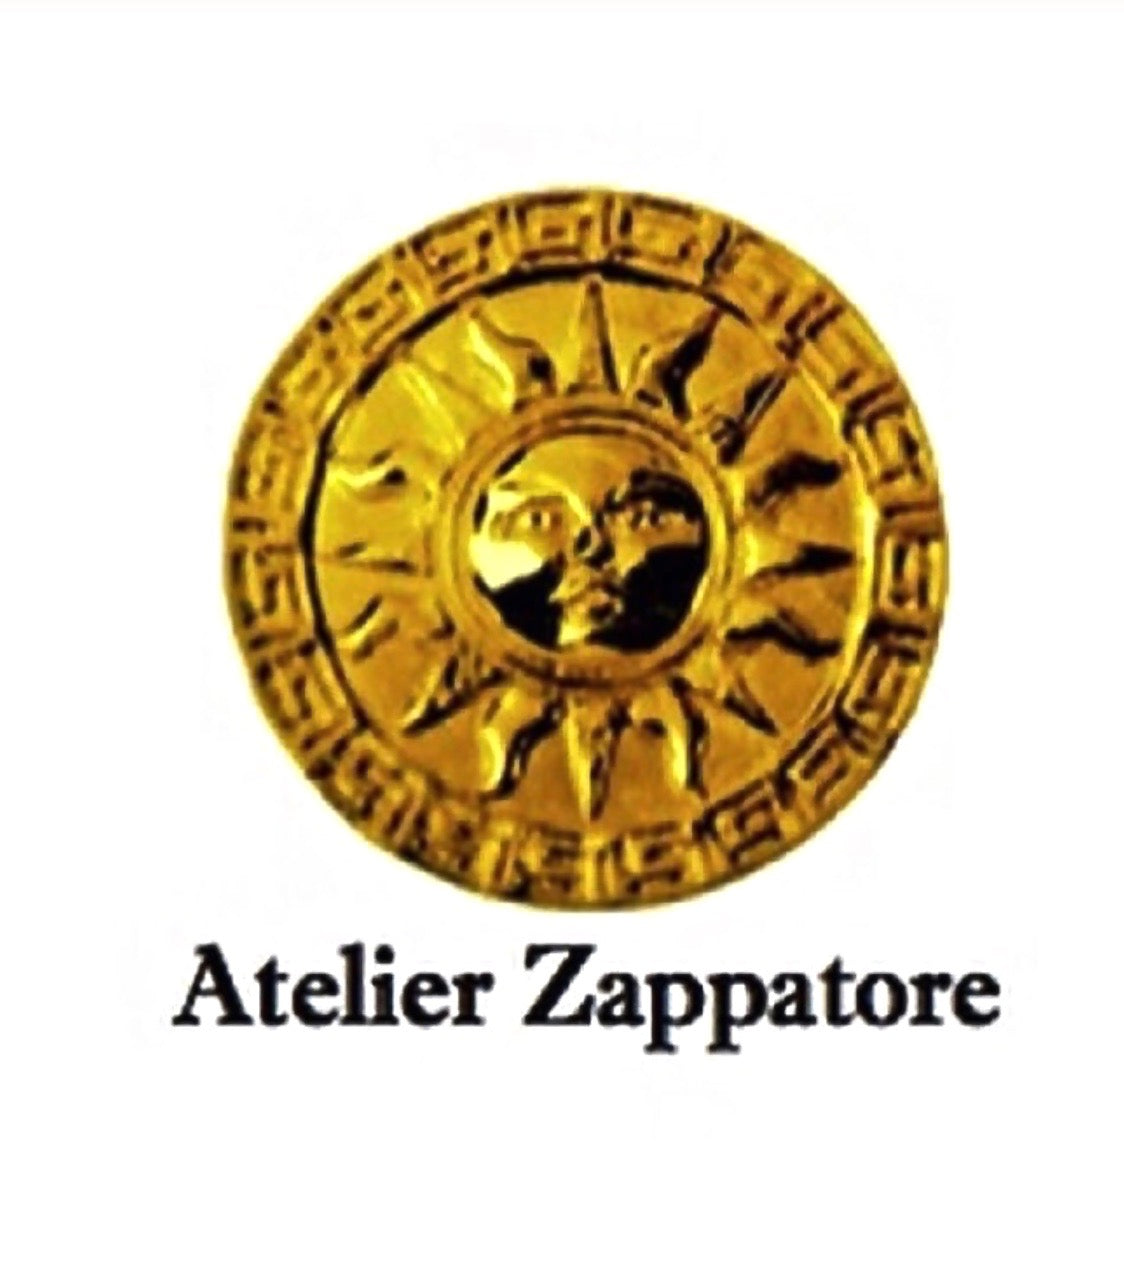 AtelierZappatore